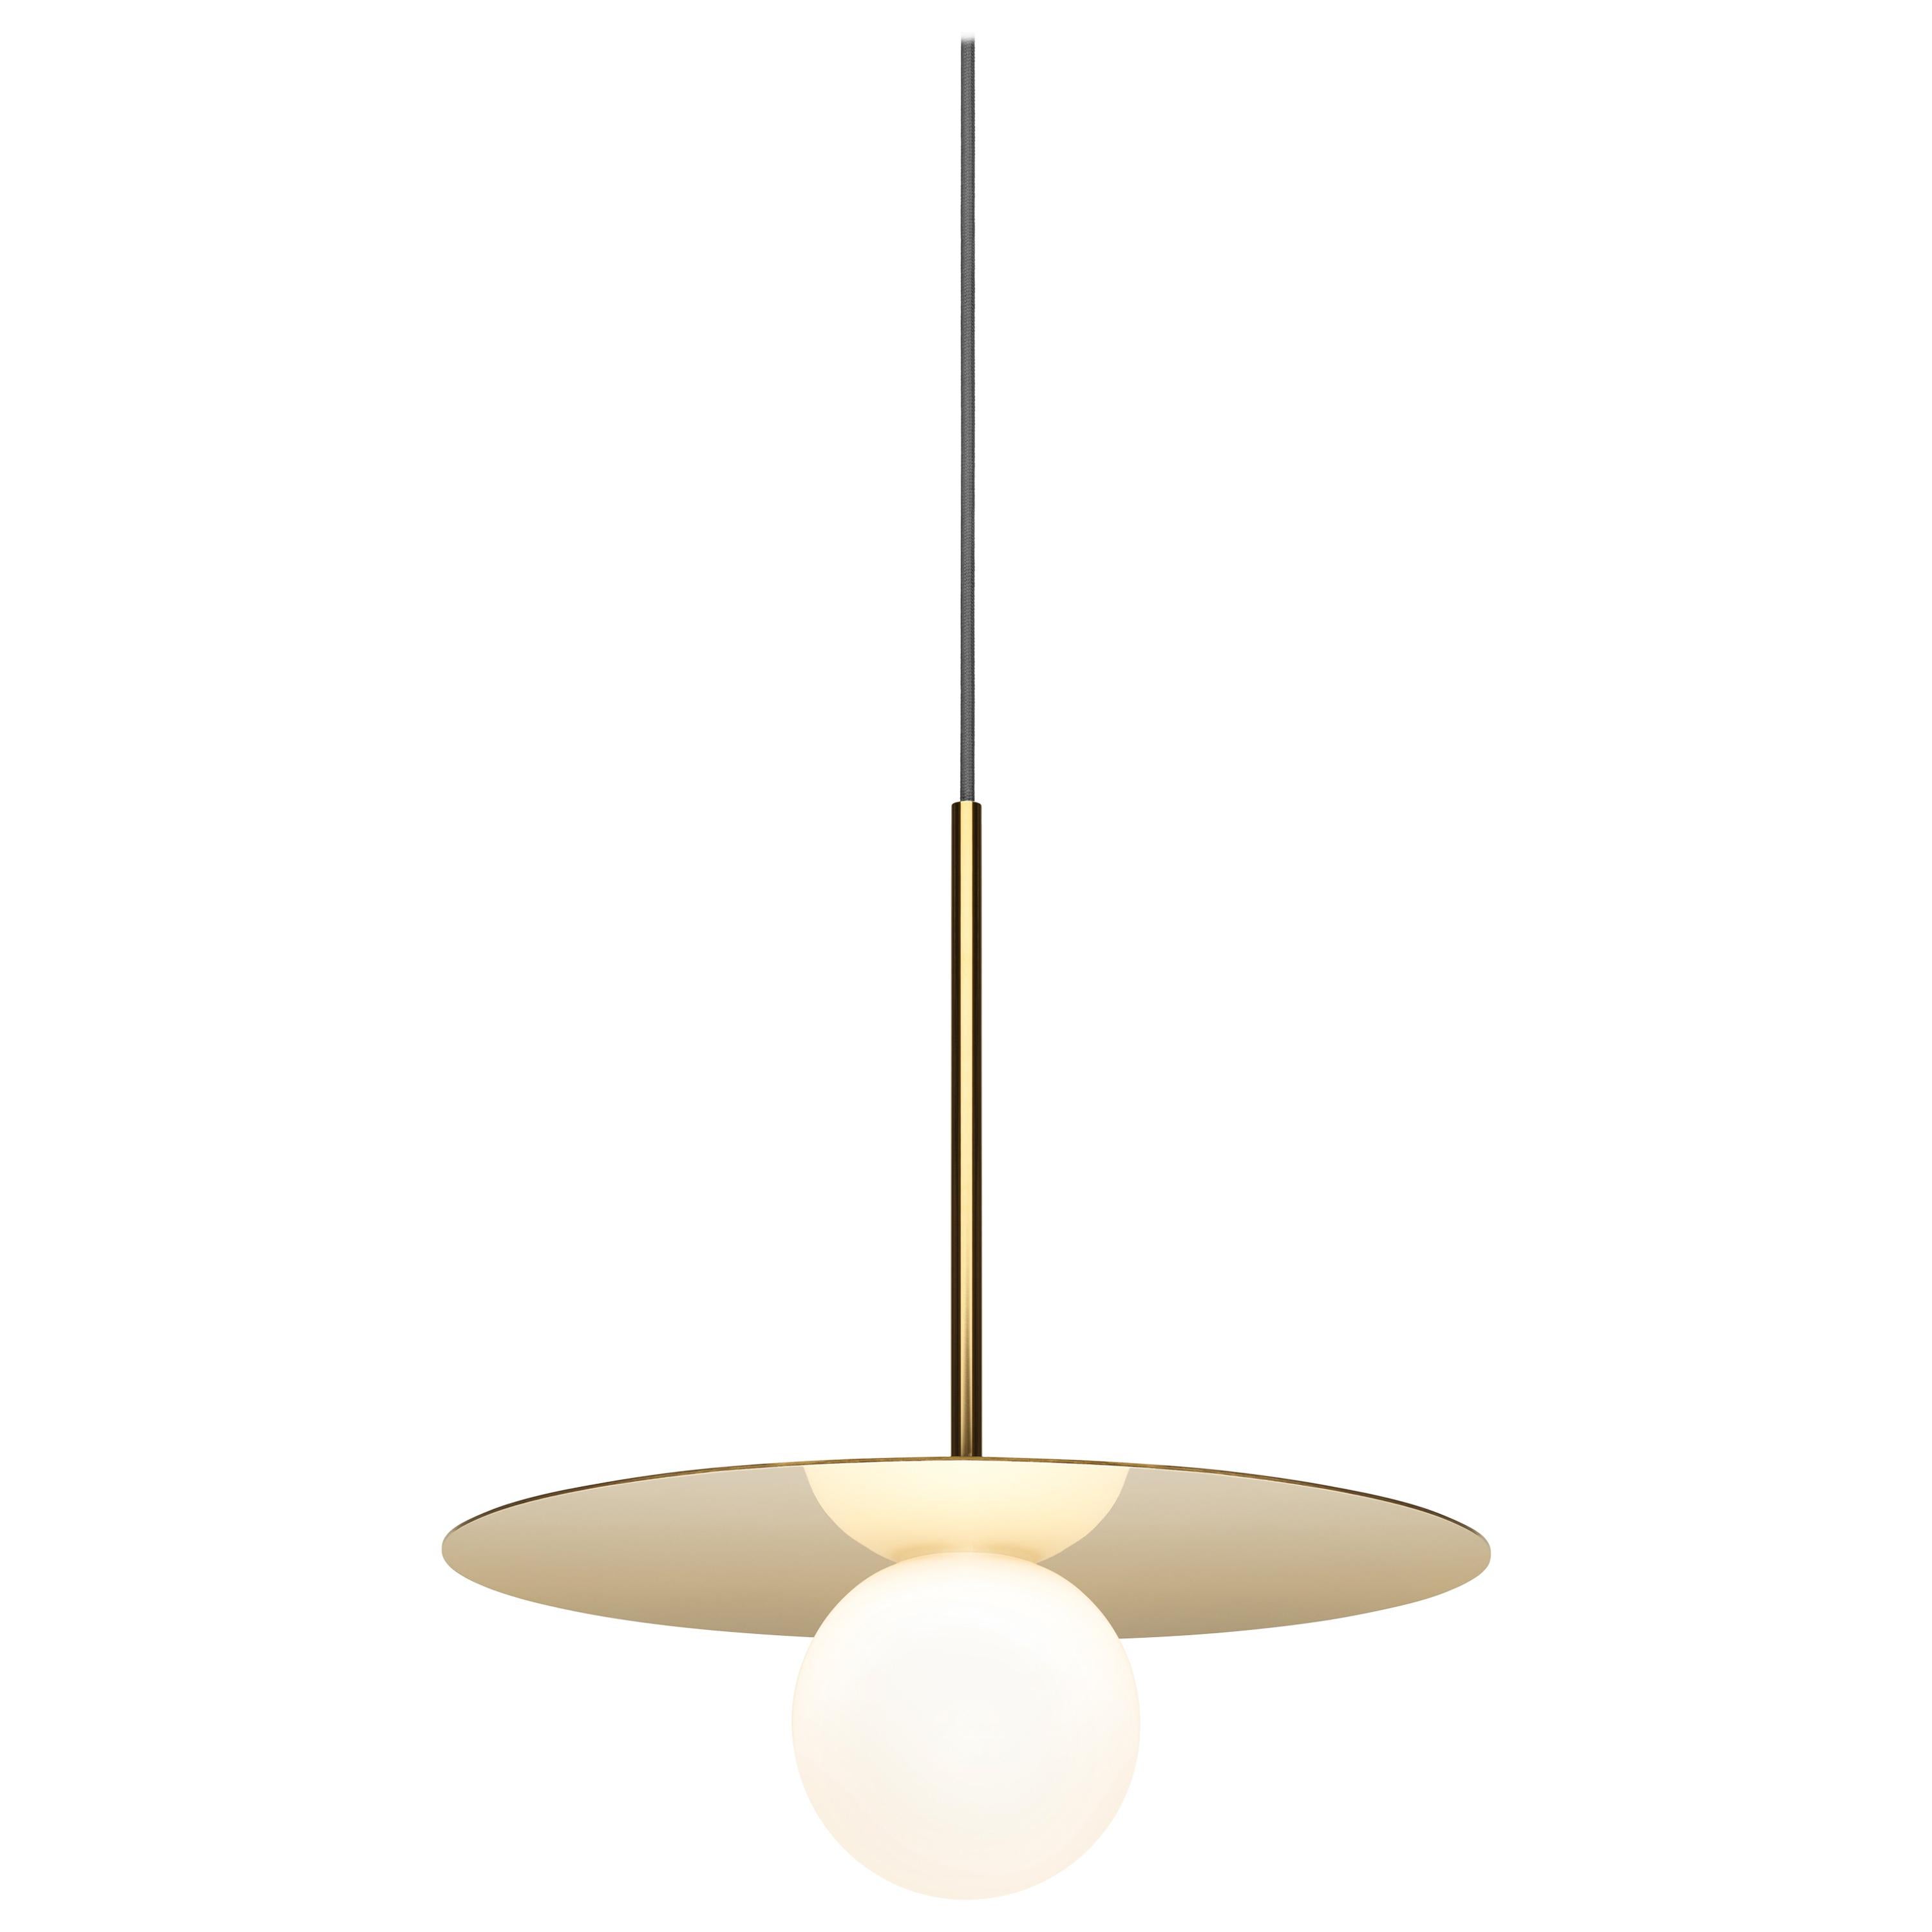 Bola Disc 12” Pendant Light in Brass by Pablo Designs